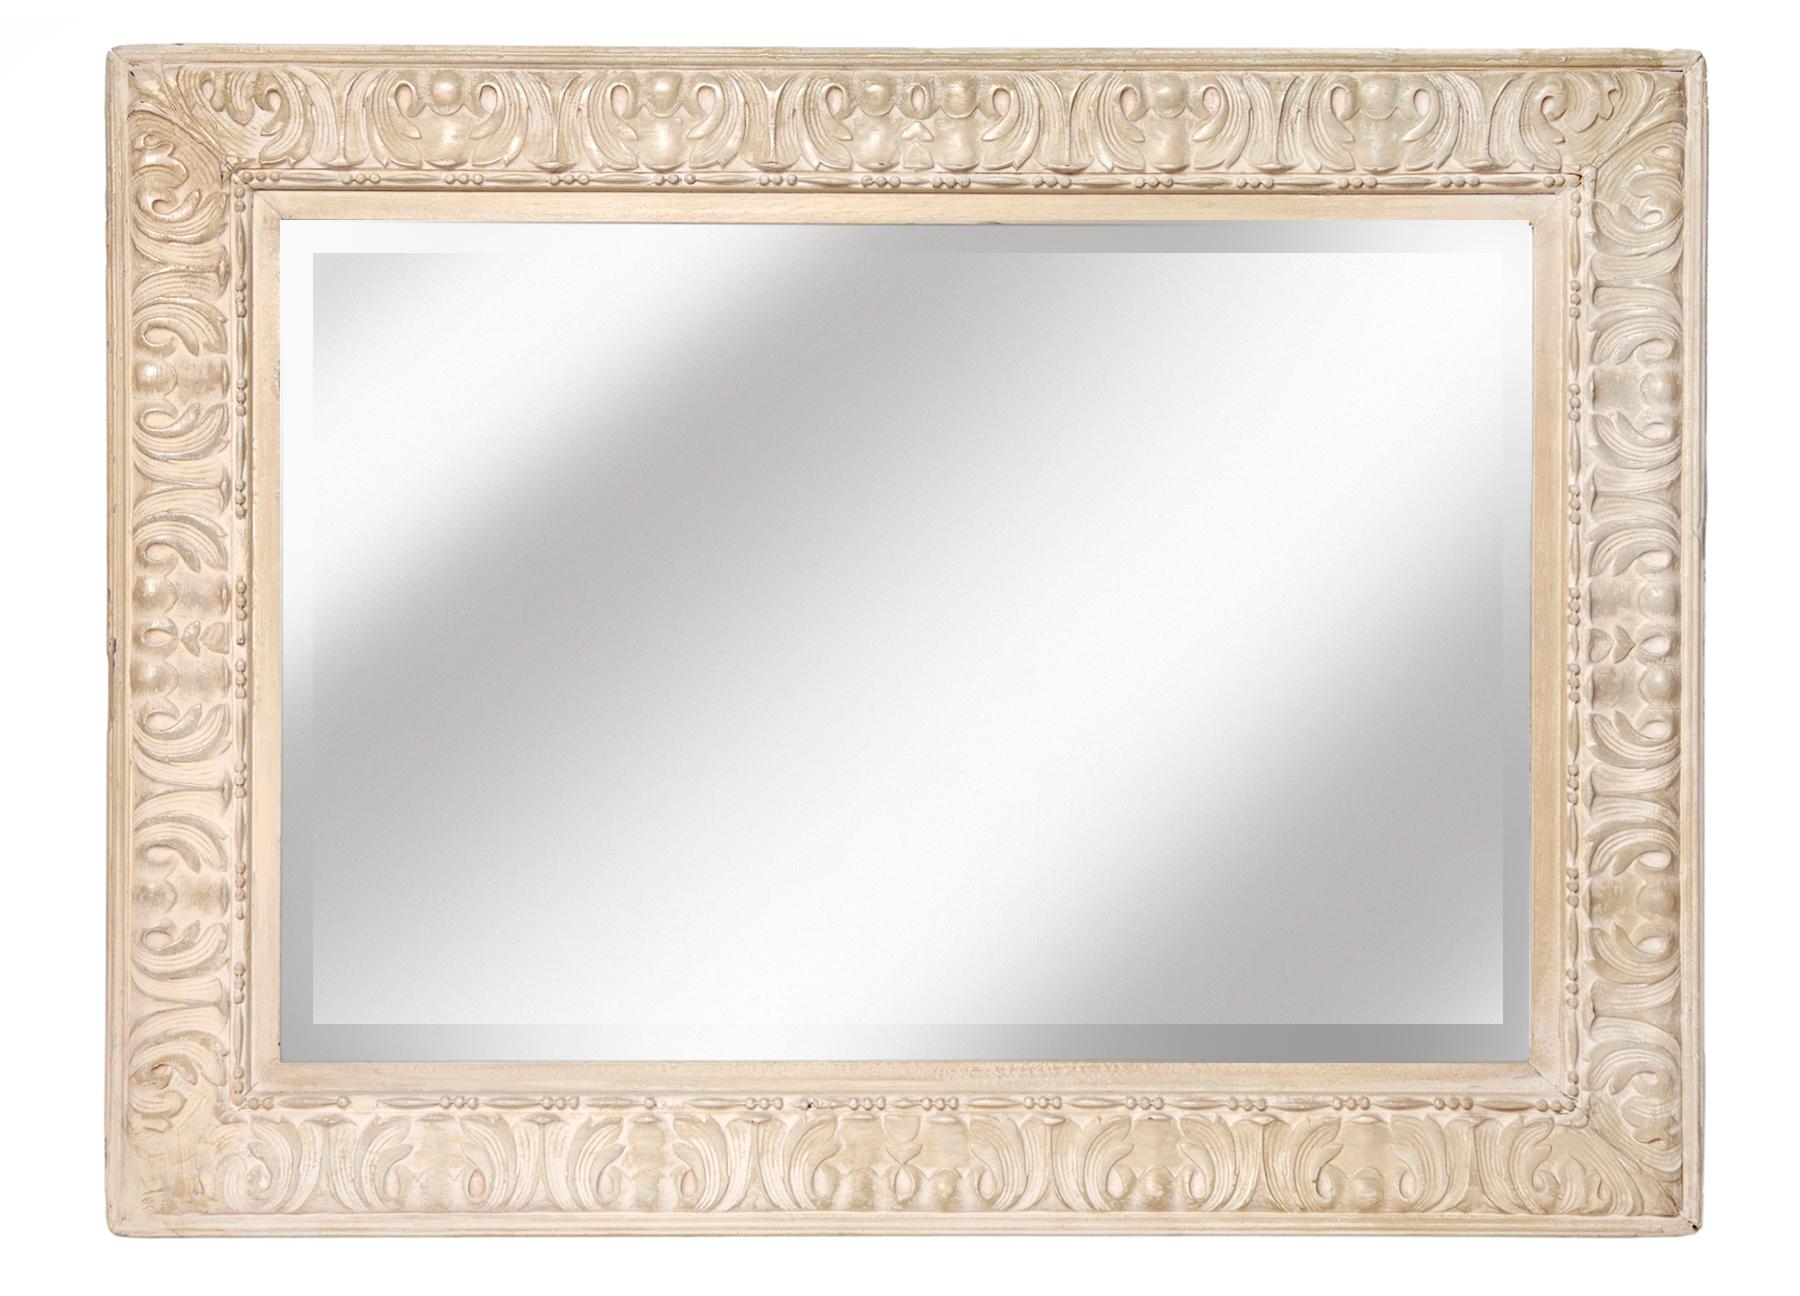 Painted hardwood framed beveled mirror. The lustrous paint in buffed over multiple off-white shades. The beveled glass appears to be original. The mirror has new backing & has been rewired to hang horizontally or vertically.